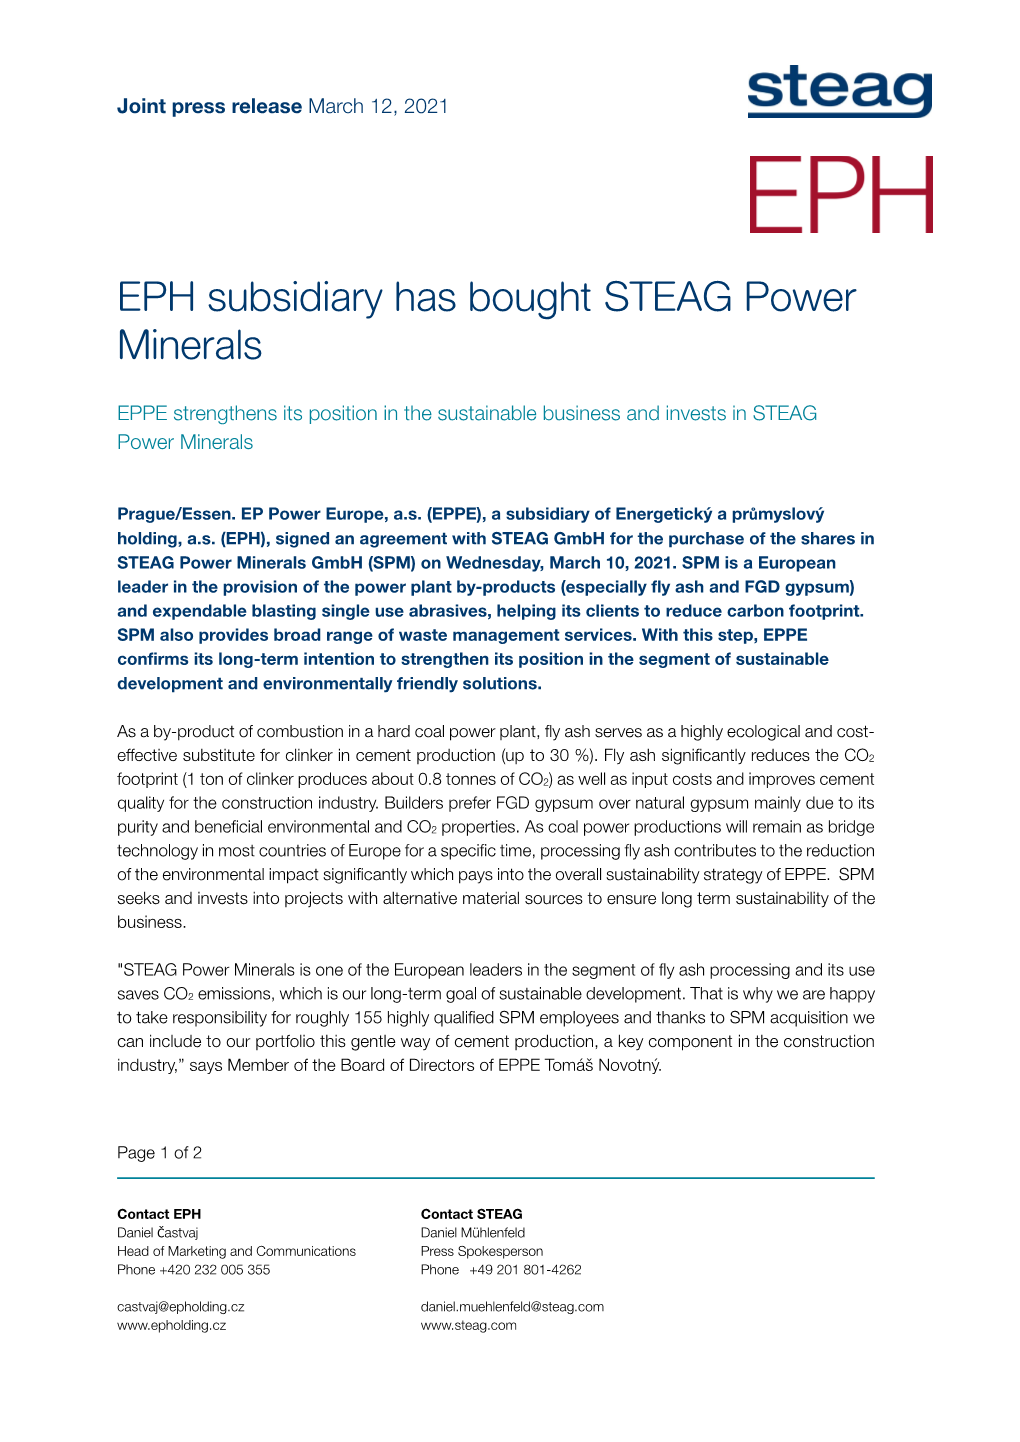 EPH Subsidiary Has Bought STEAG Power Minerals